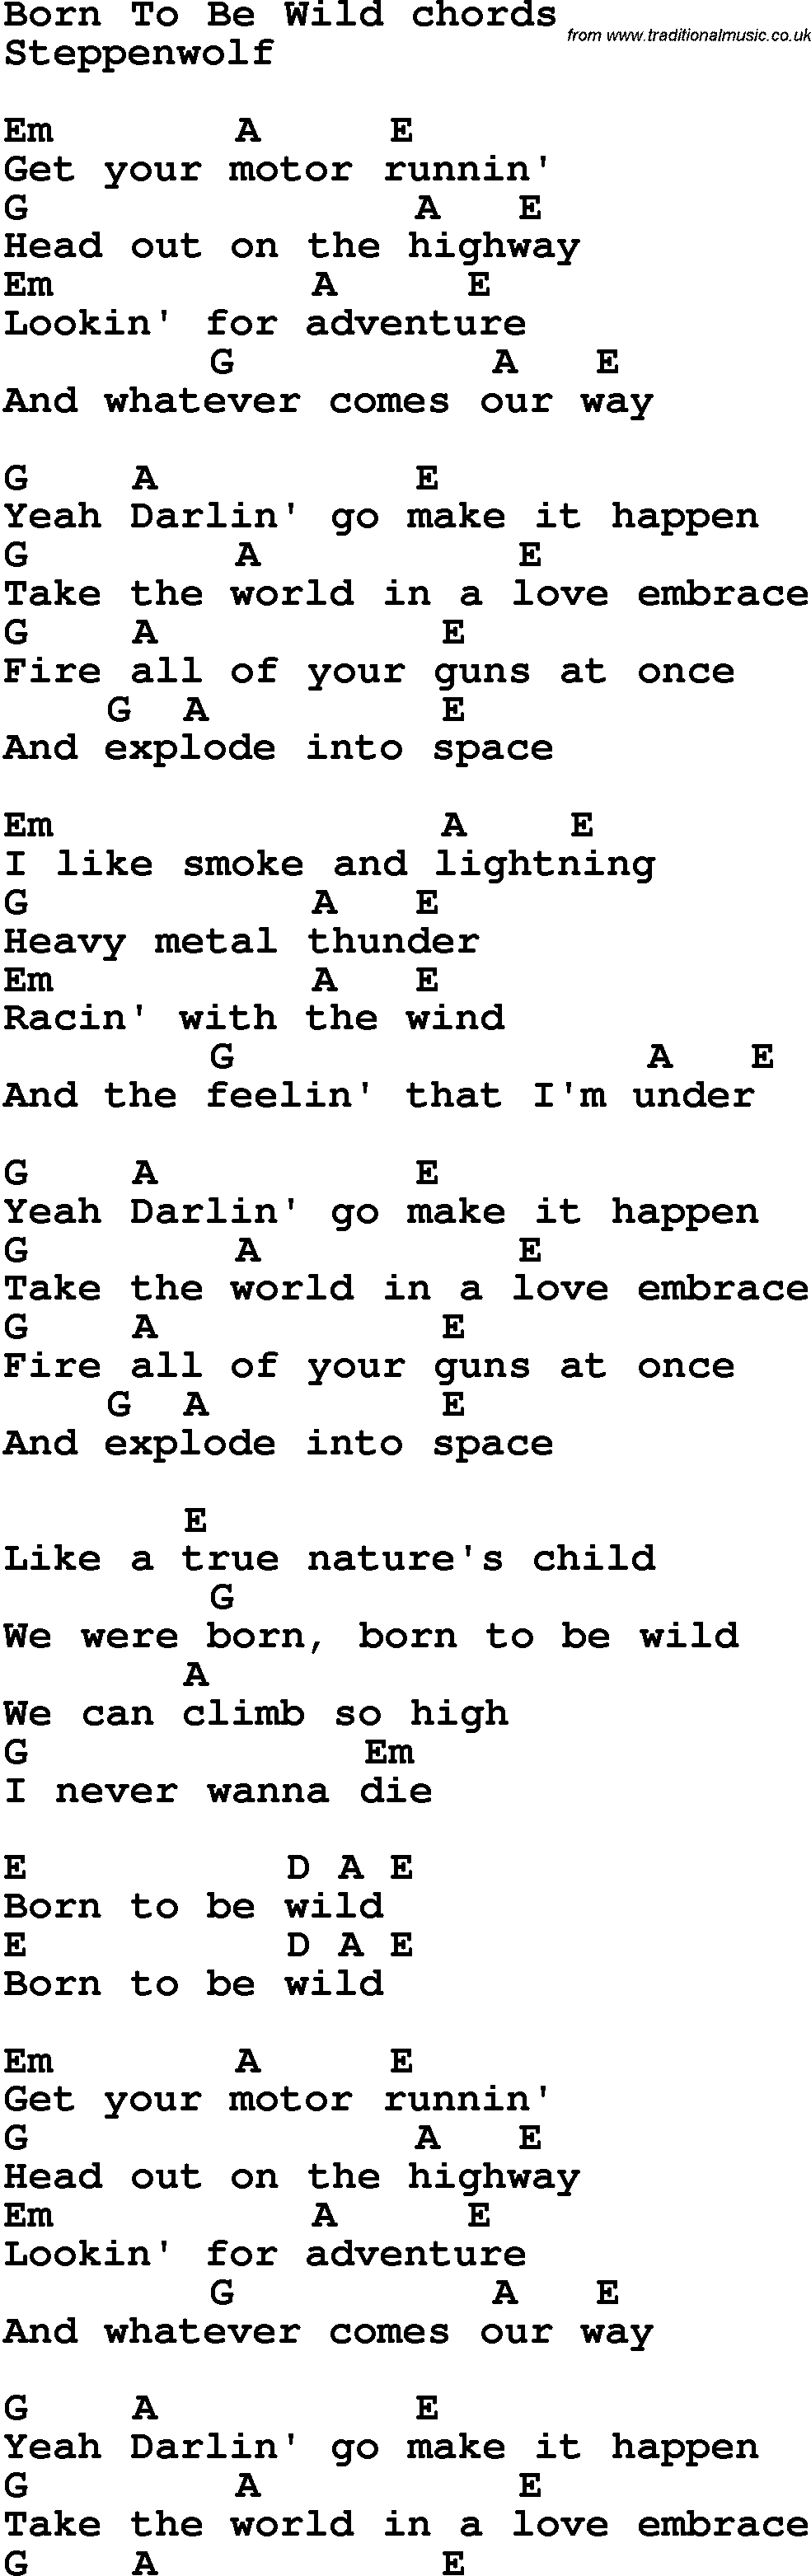 Song Lyrics with guitar chords for Born To Be Wild